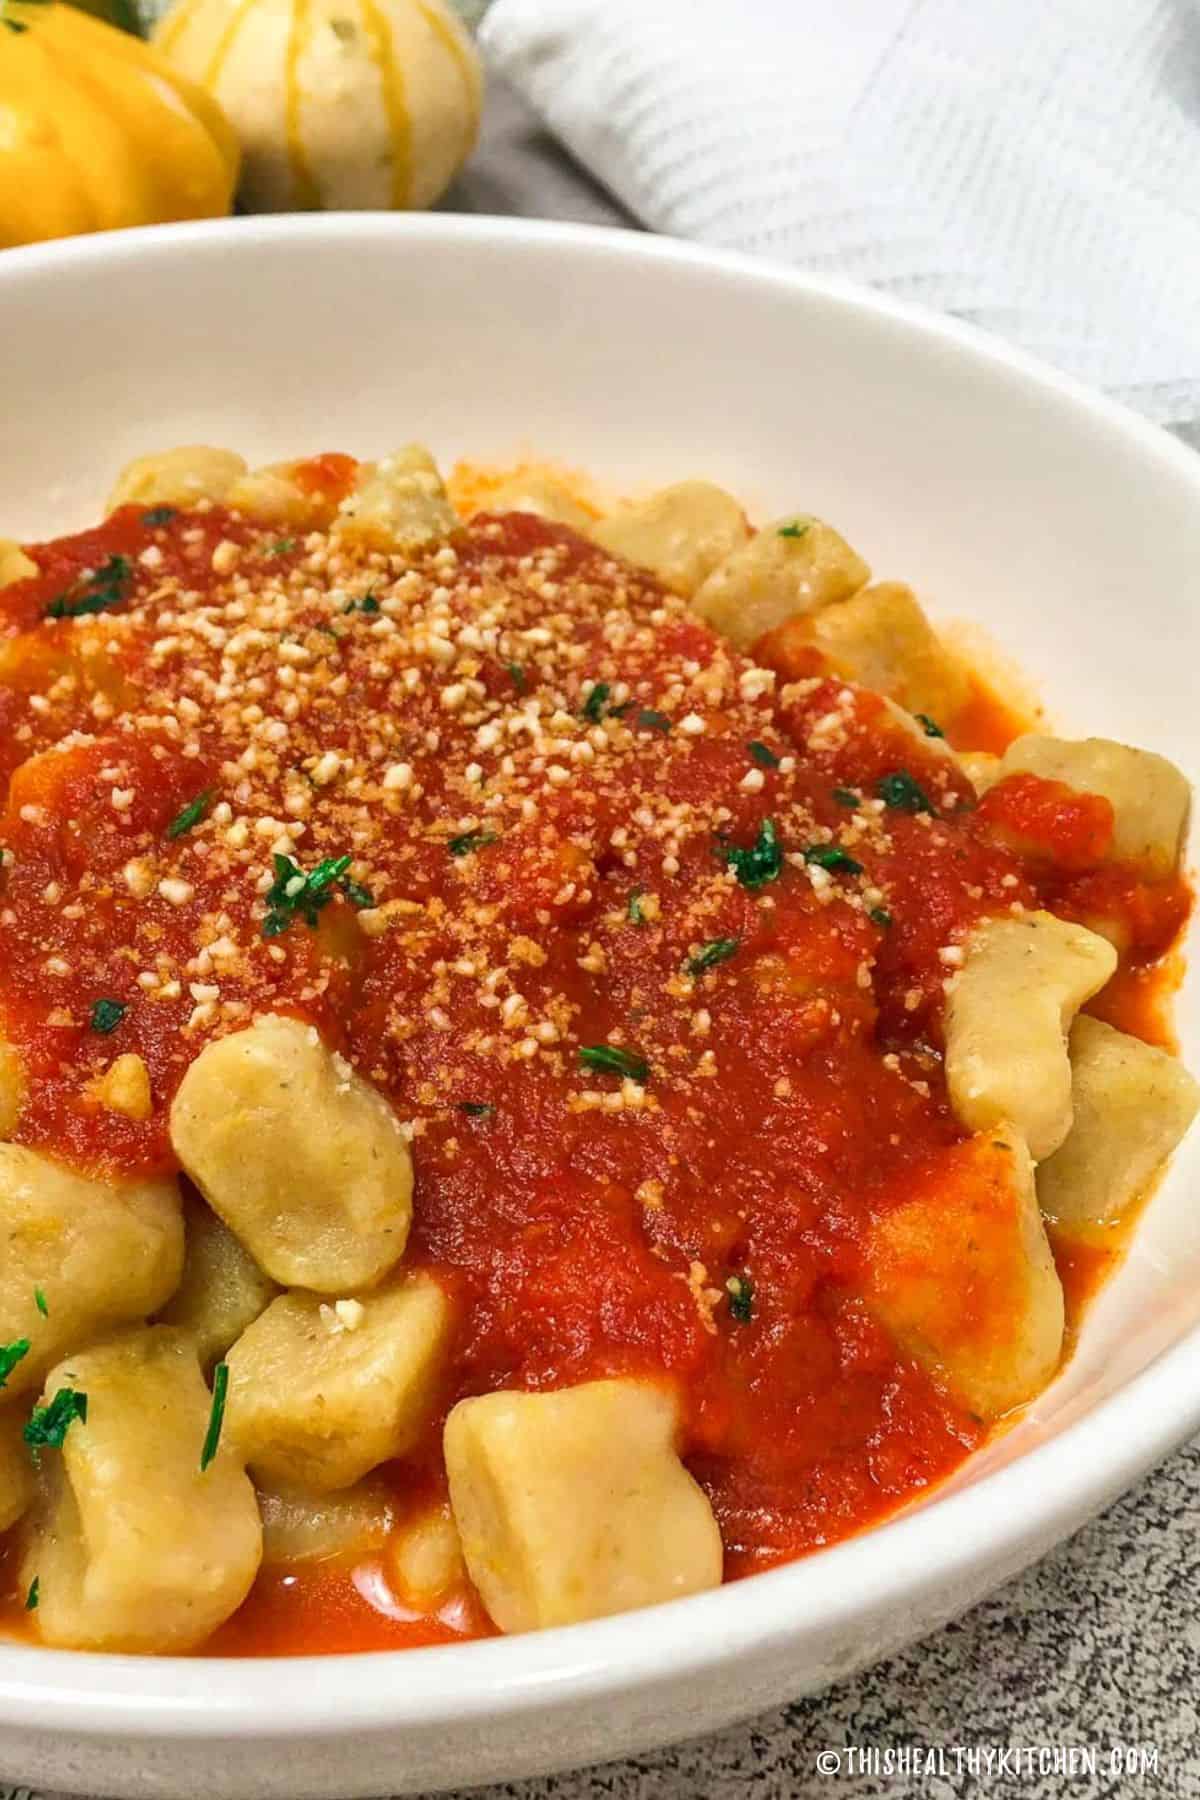 Bowl of gnocchi with tomato sauce on top.